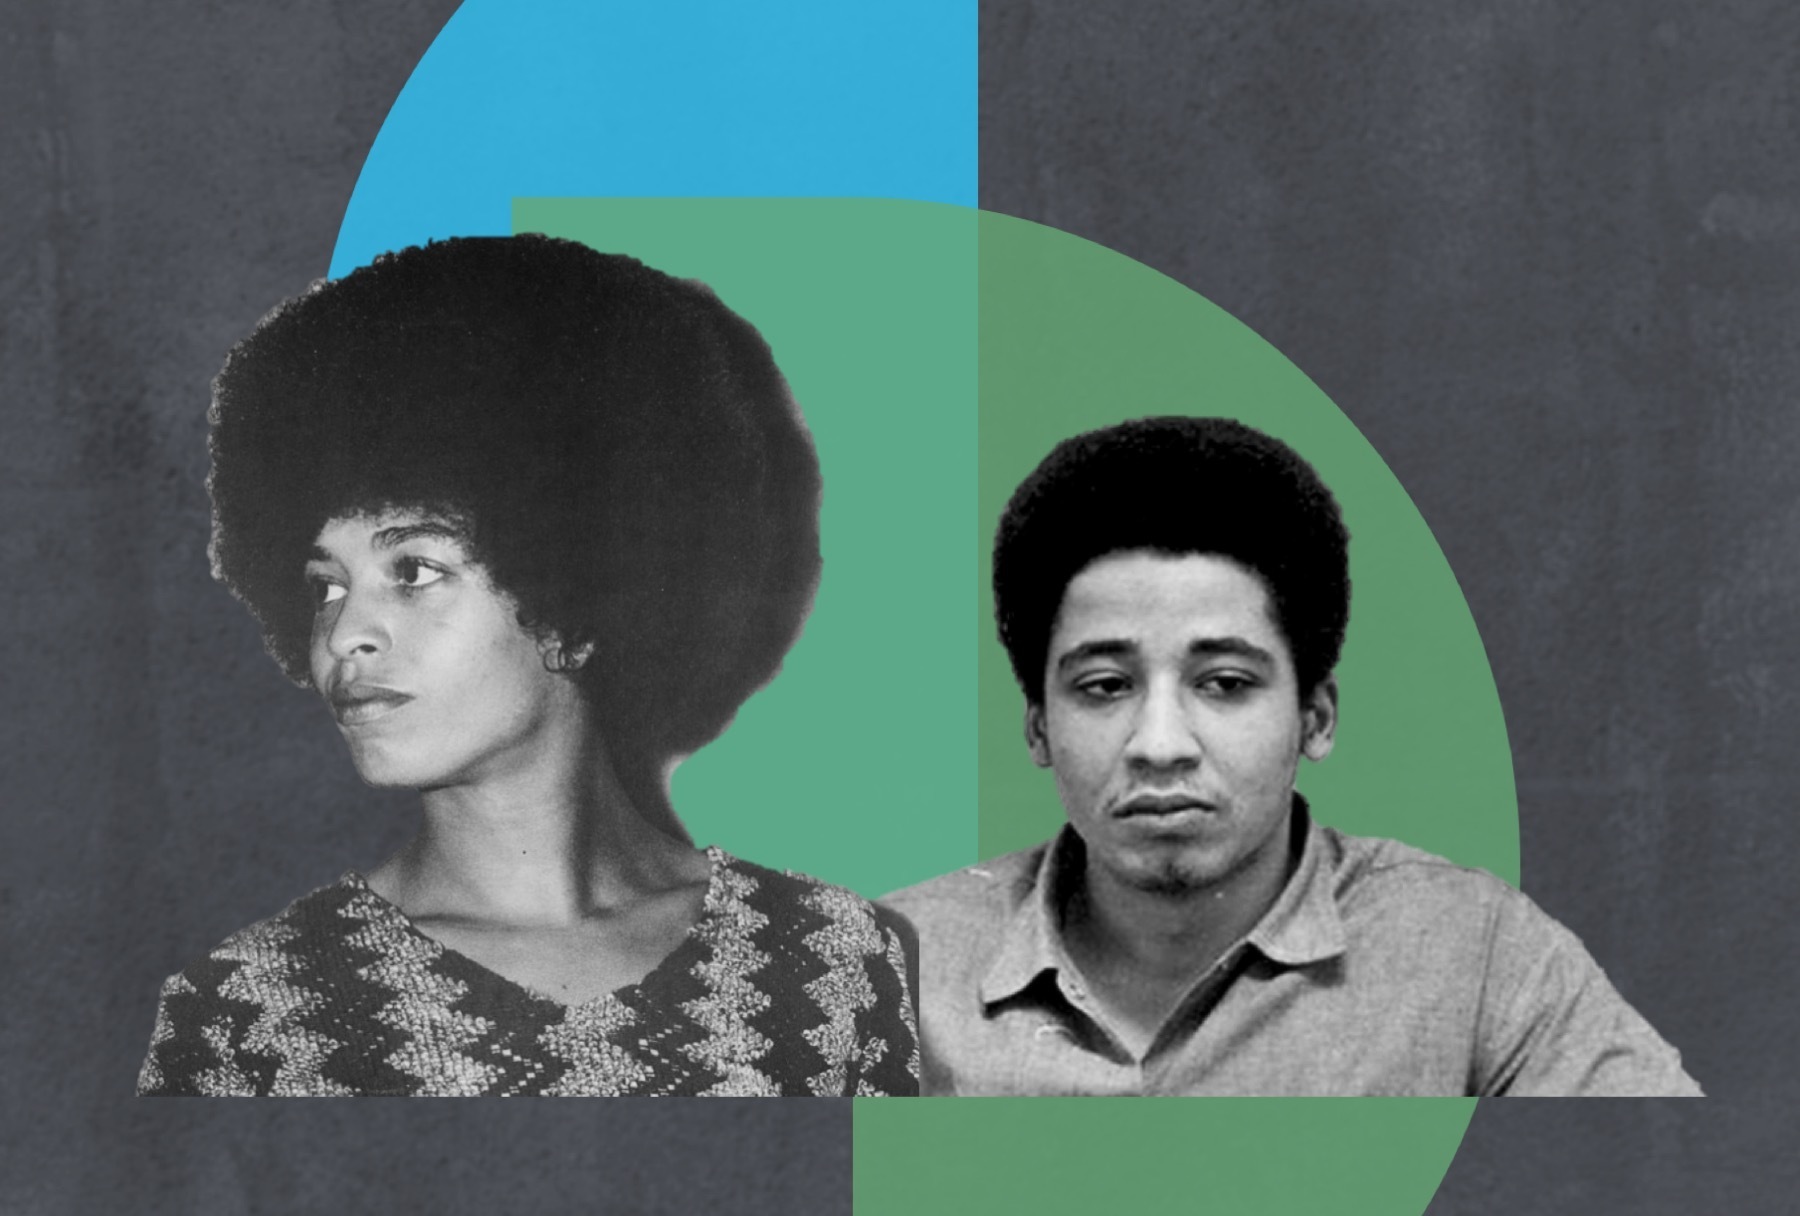 Cut out images of Angela Davis and George Jackson against a gray, blue, and green abstract background.